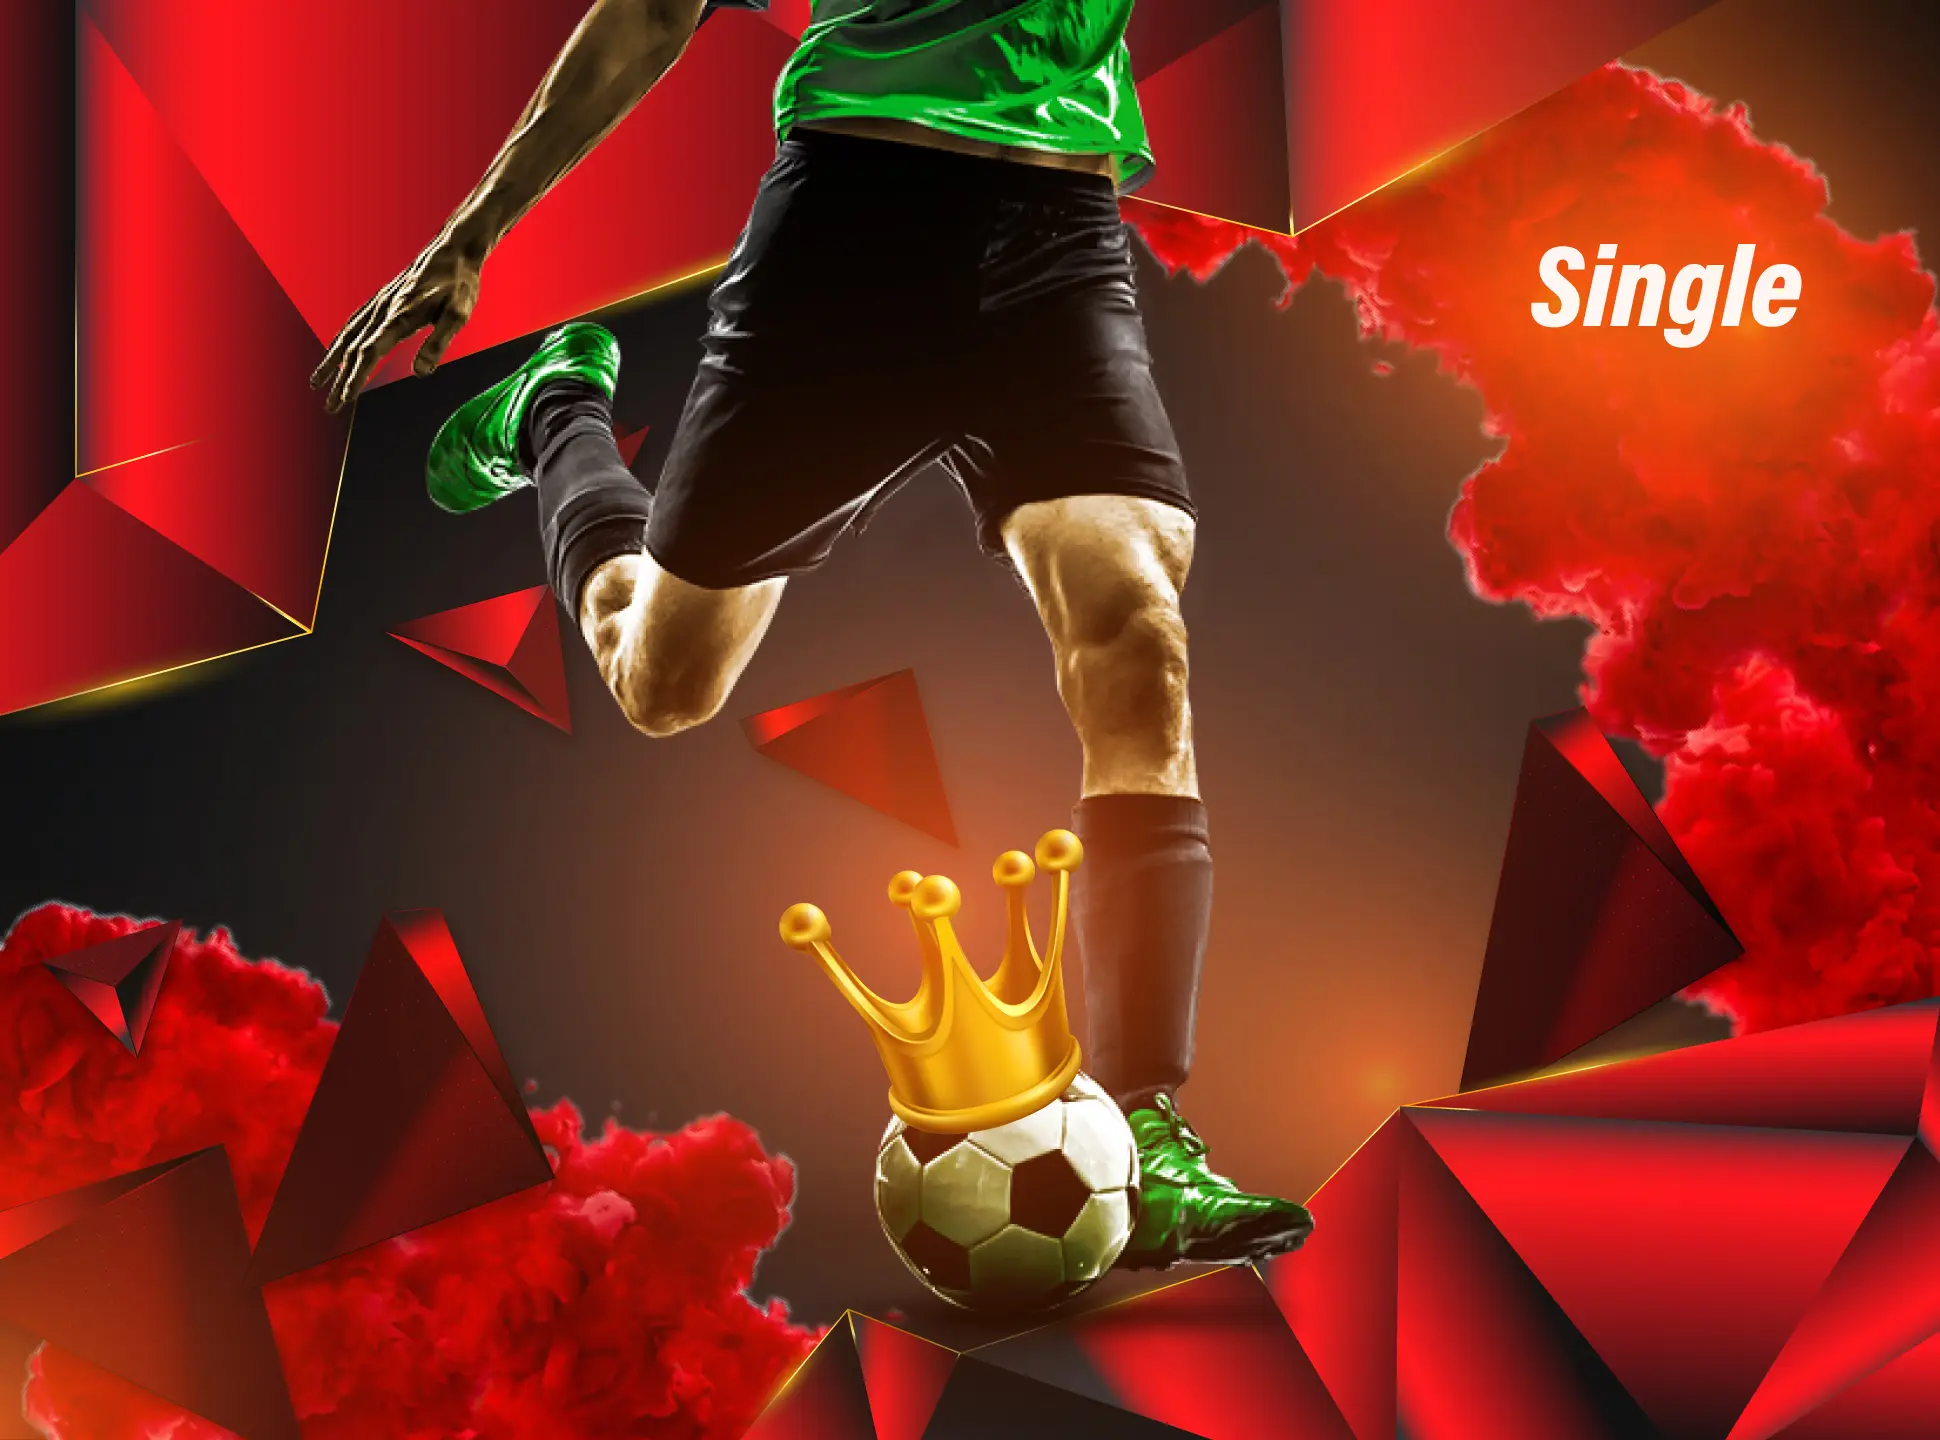 Place a single bet and get a chance to win it at MarvelBet.